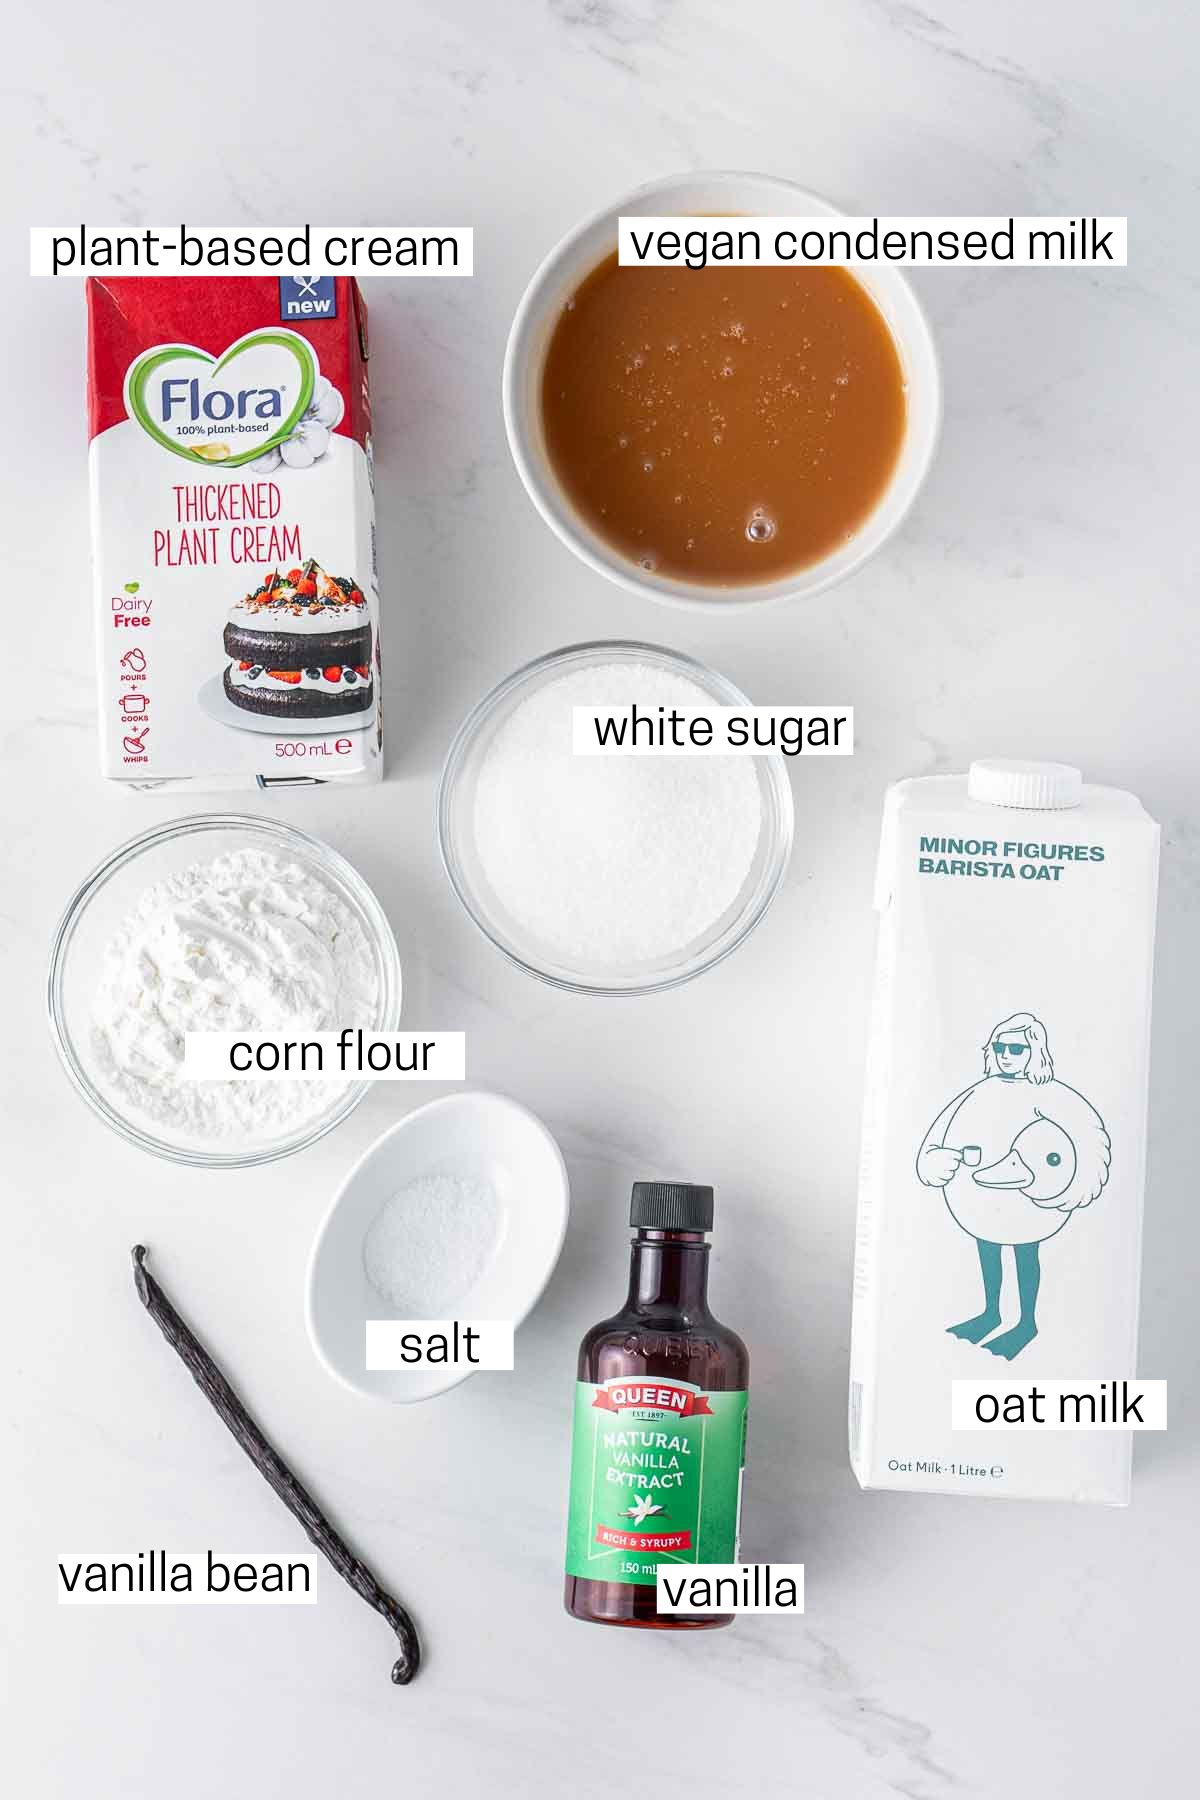 All ingredients needed to make vegan vanilla ice cream laid out in bowls.